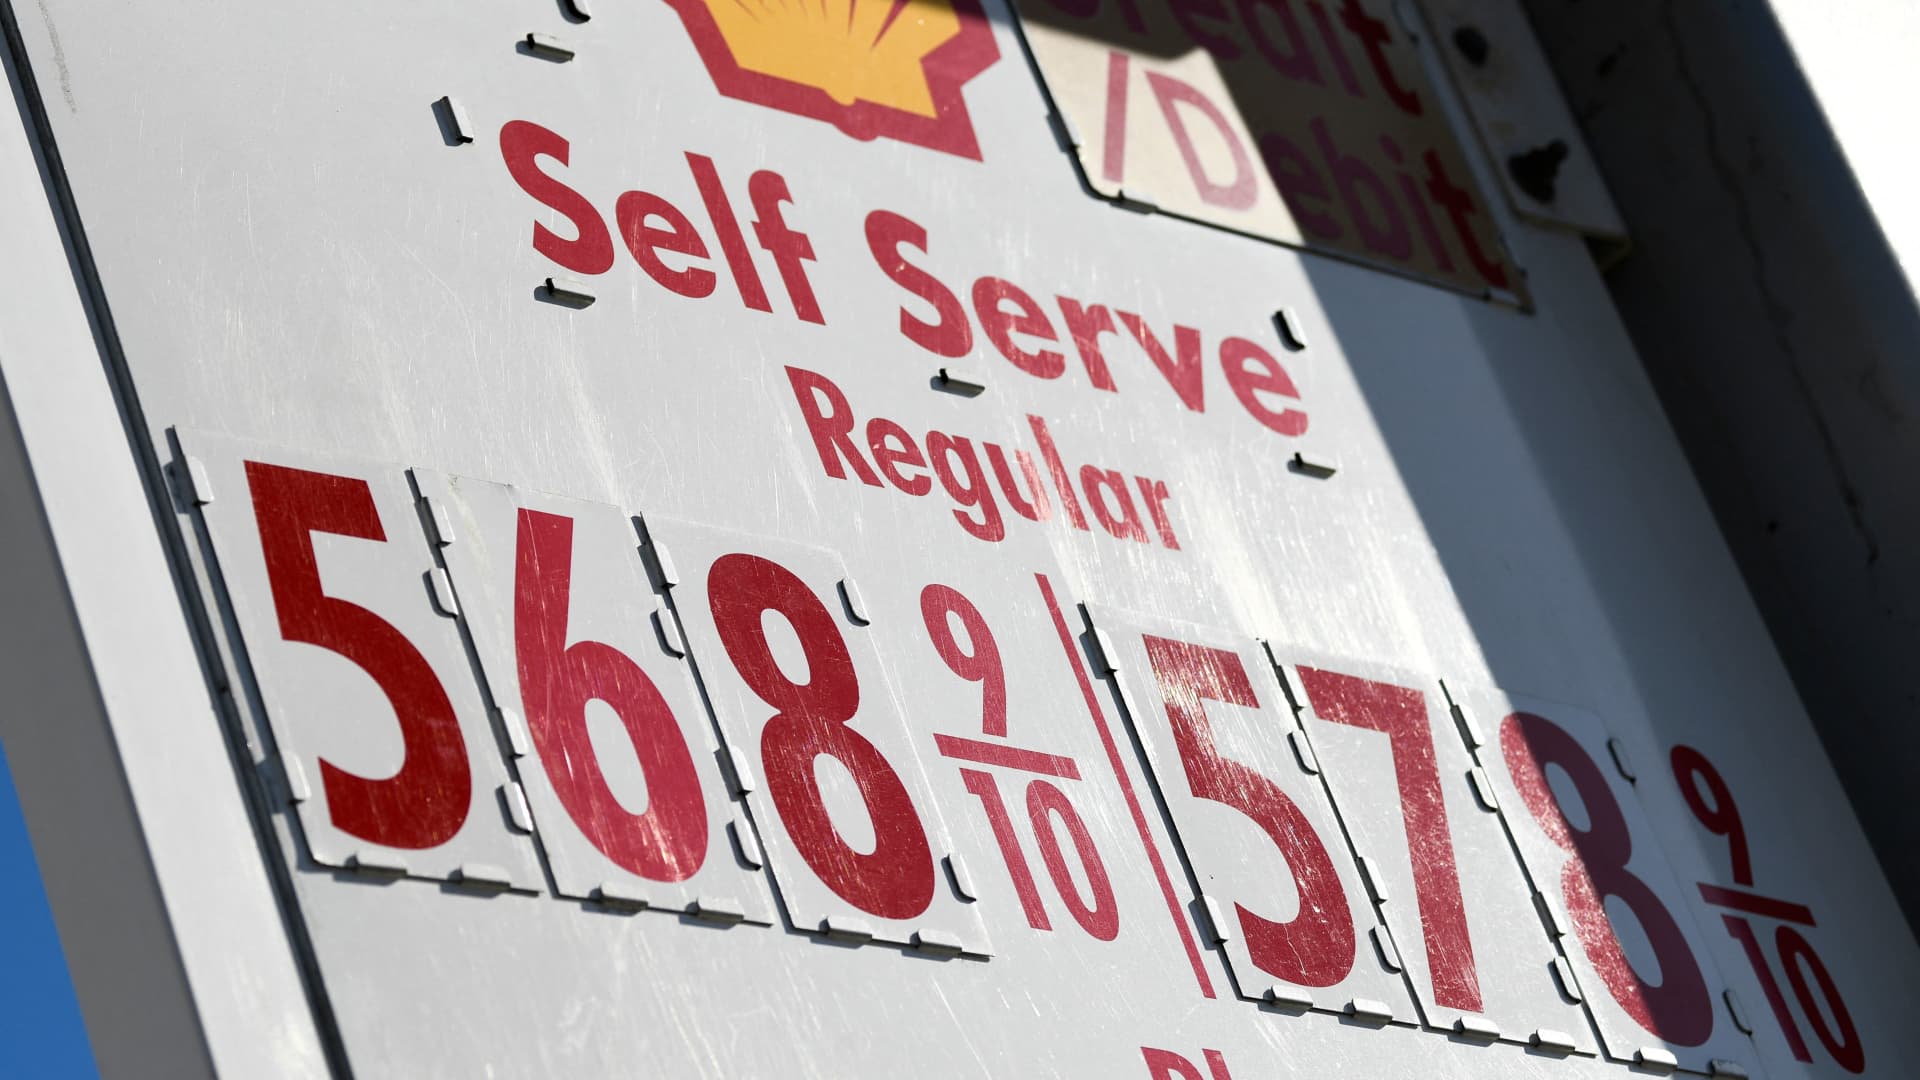 Gasoline fuel prices above five dollars a gallon are displayed at a Shell gas station in the Chinatown neighborhood of Los Angeles, California, on February 17, 2022.